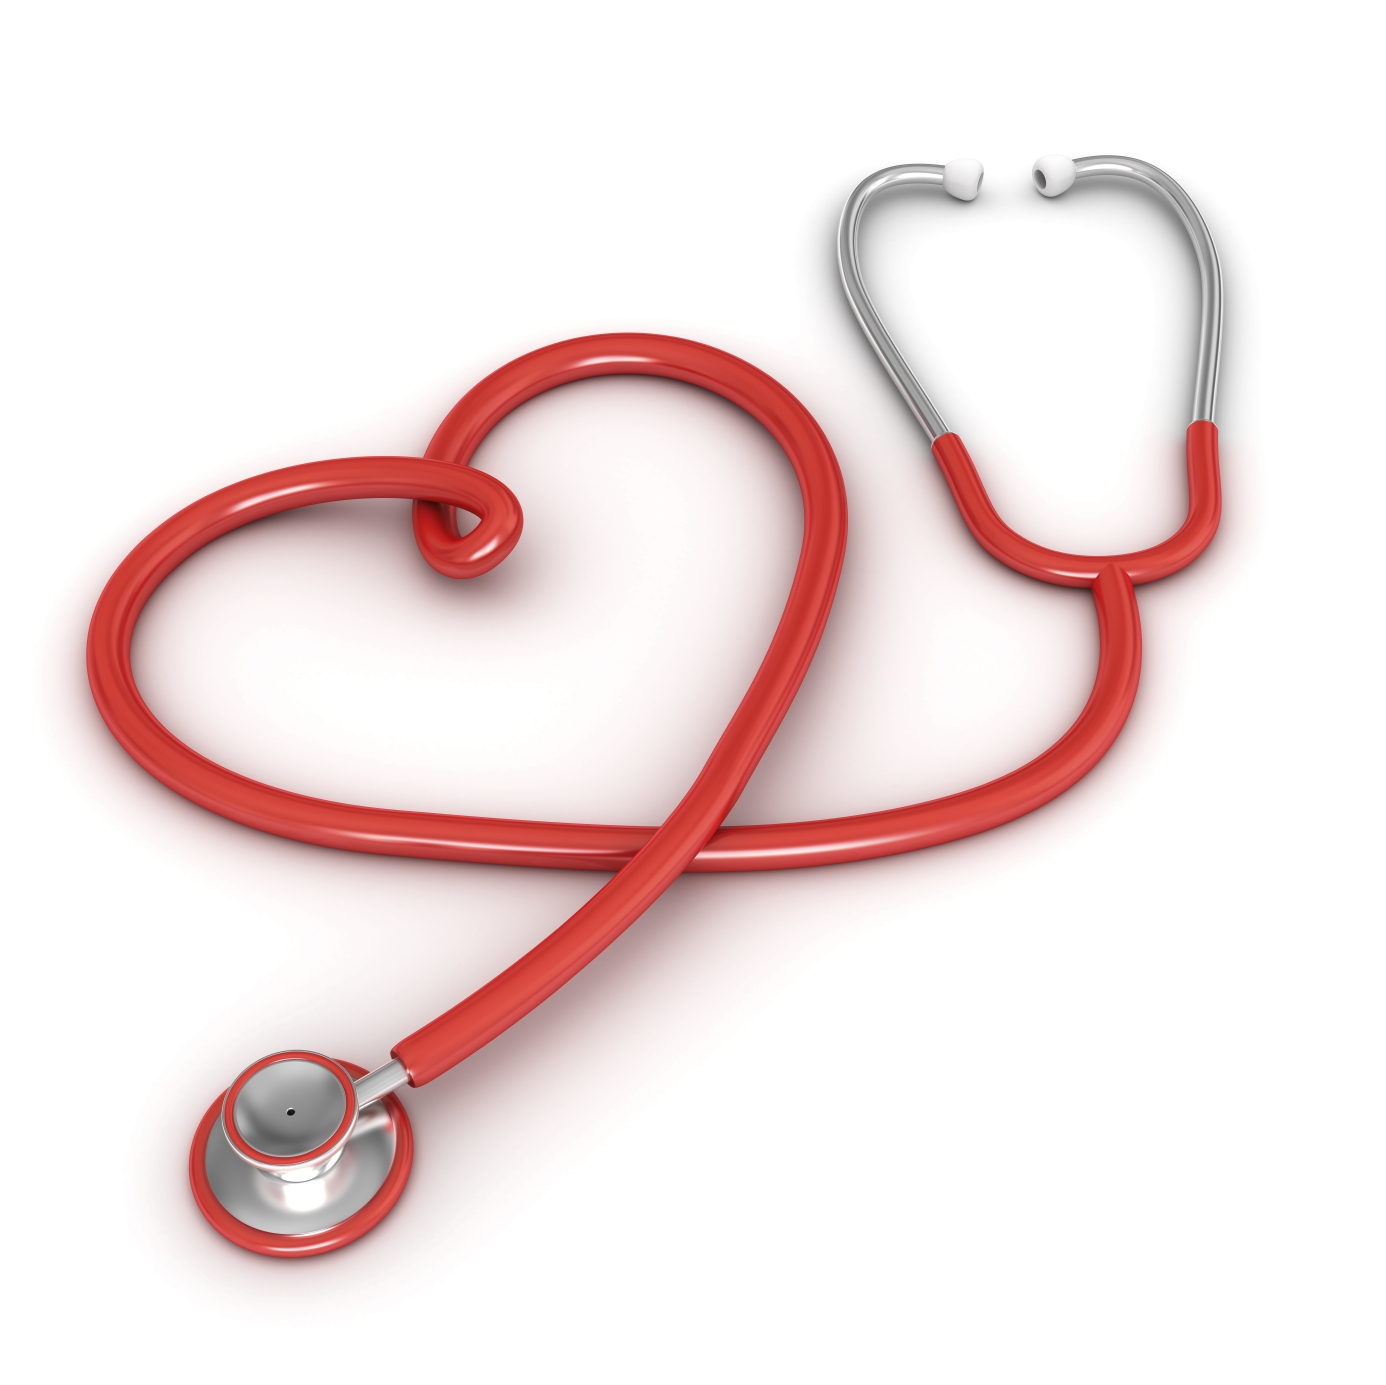 Stethoscope Pictures - Clipart library